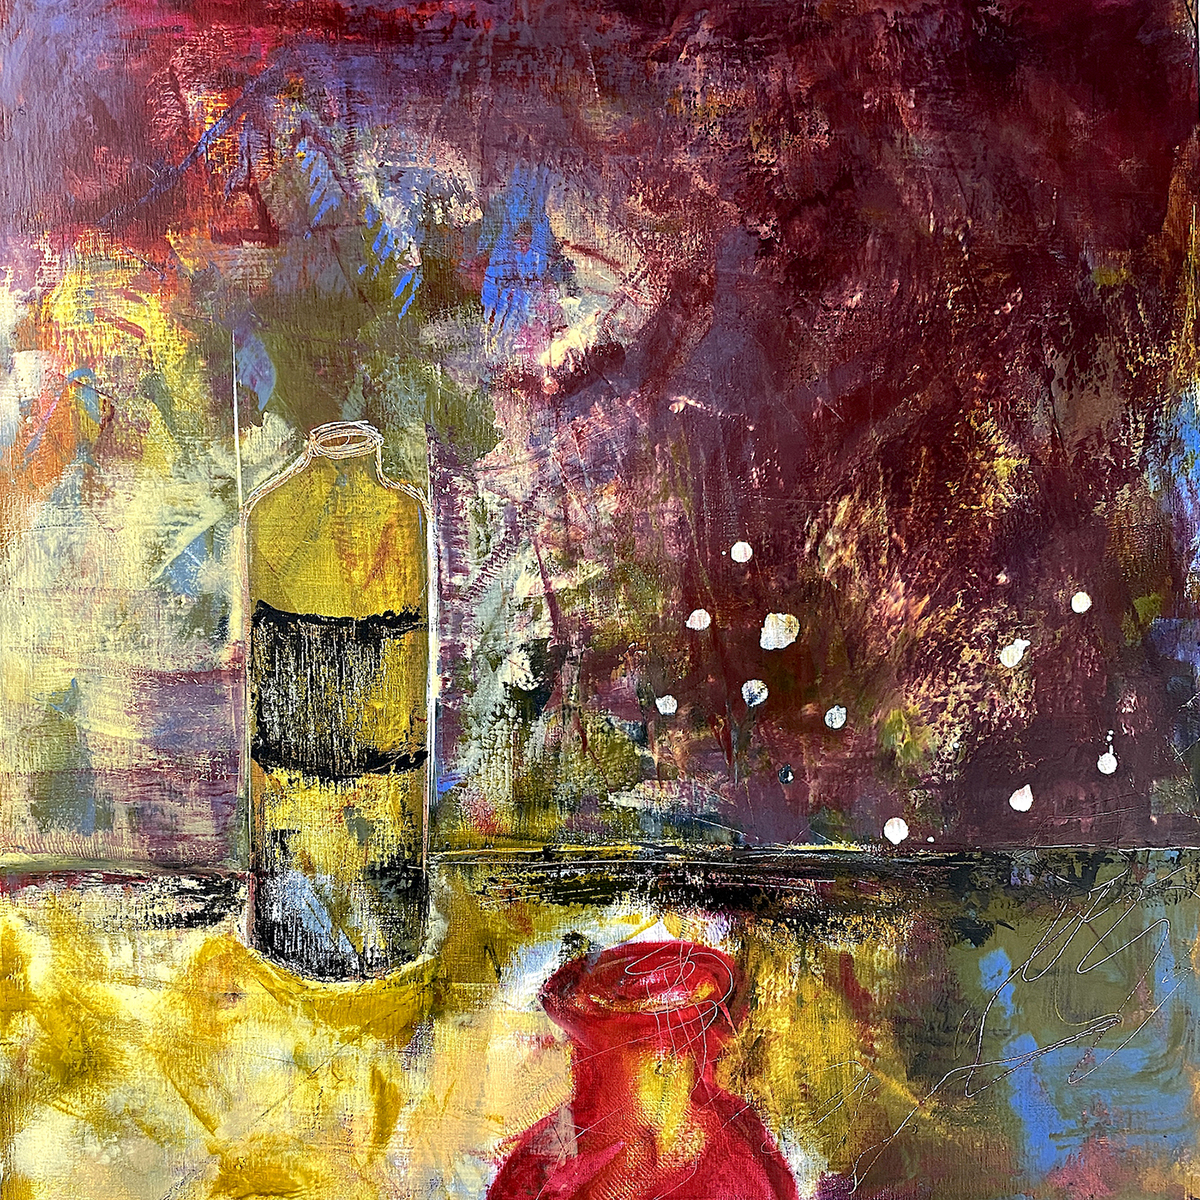 Drunk Again, oil and cold wax painting by Elizabeth Shaw Neviaser.